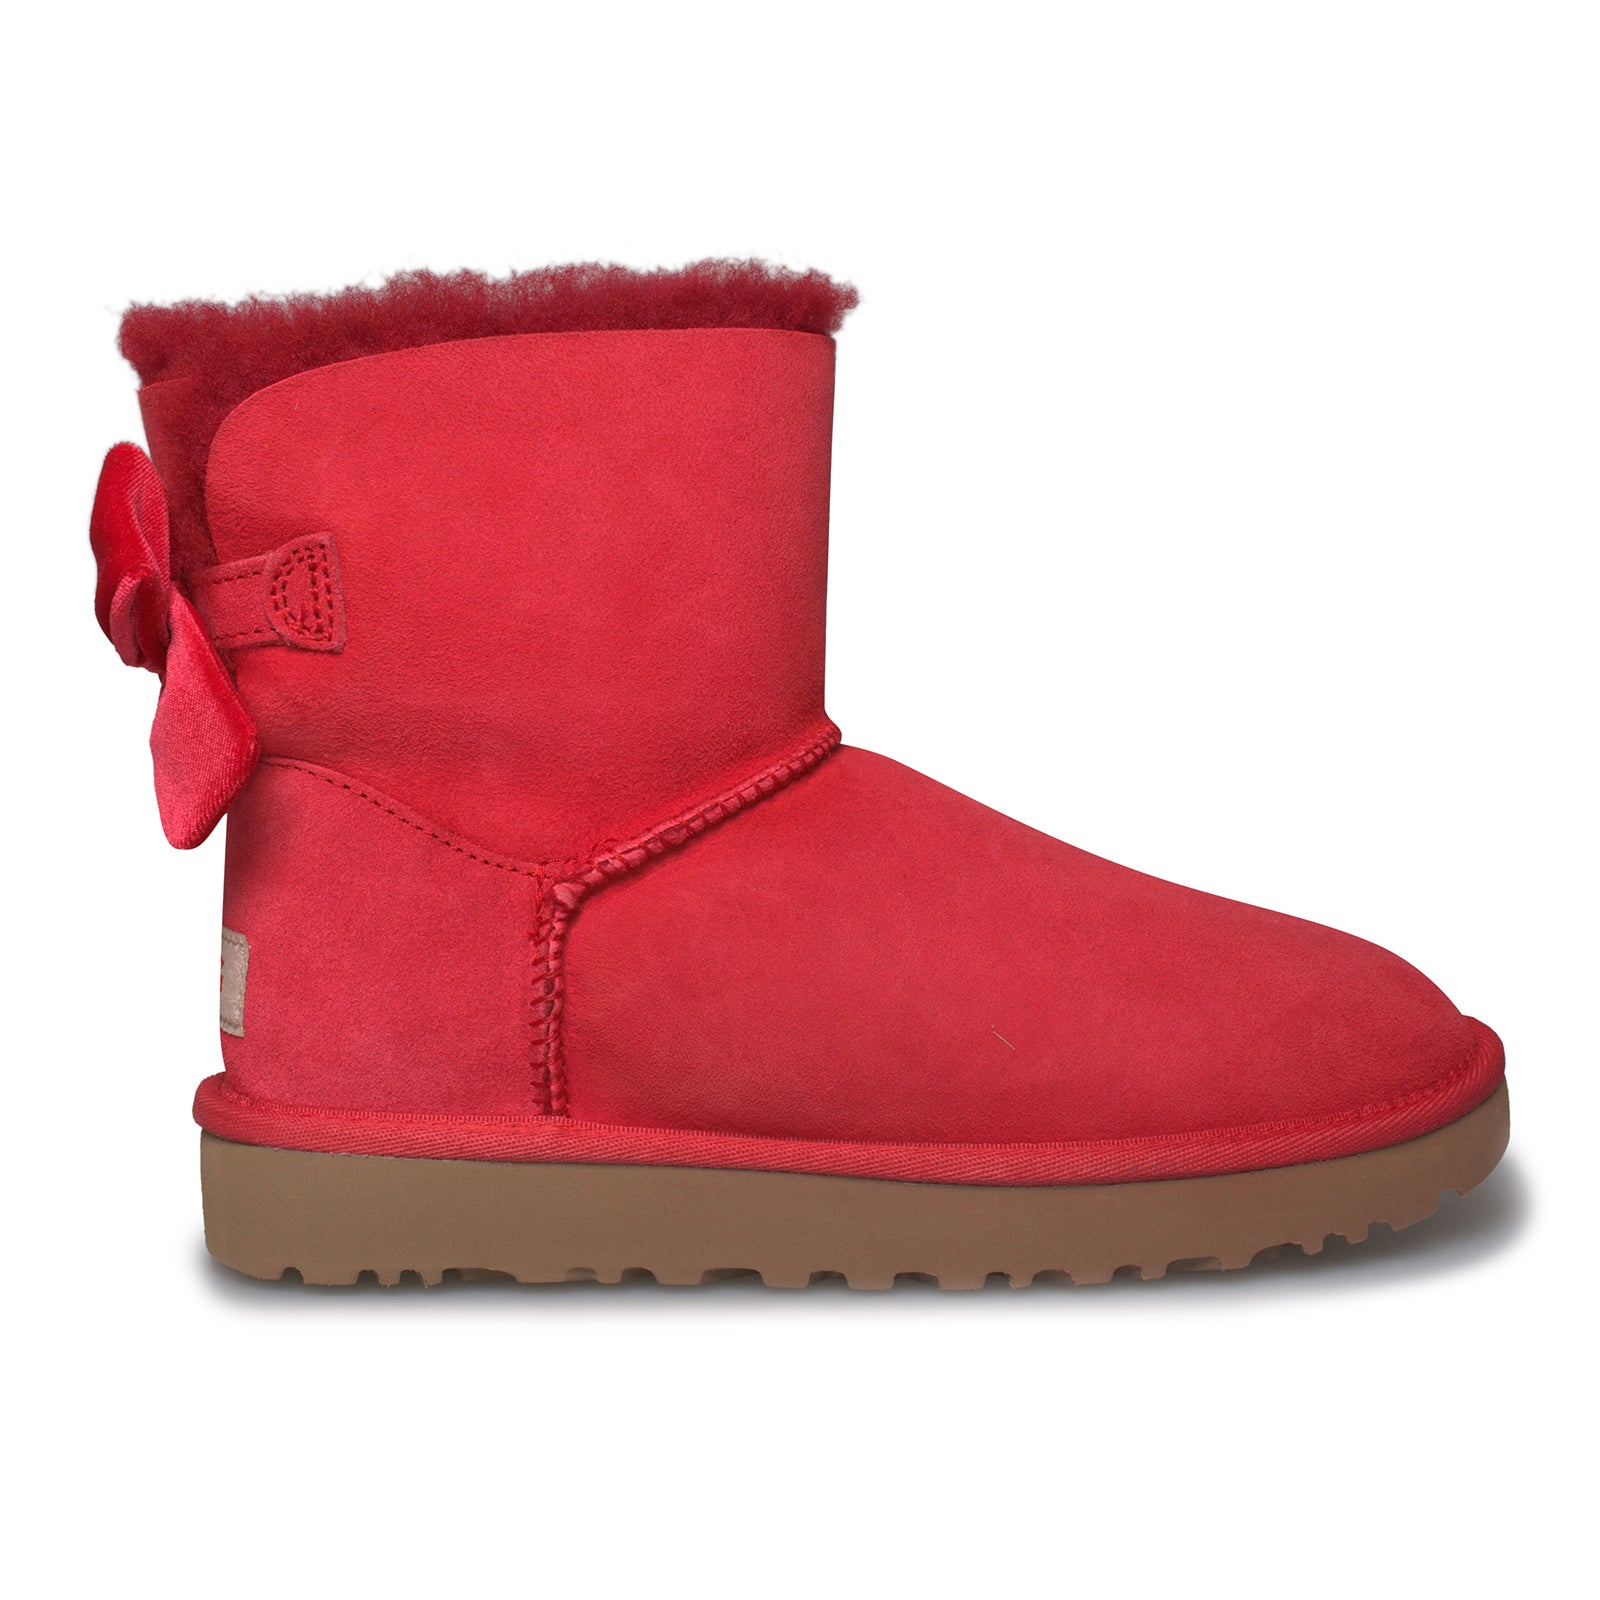 new red ugg boots